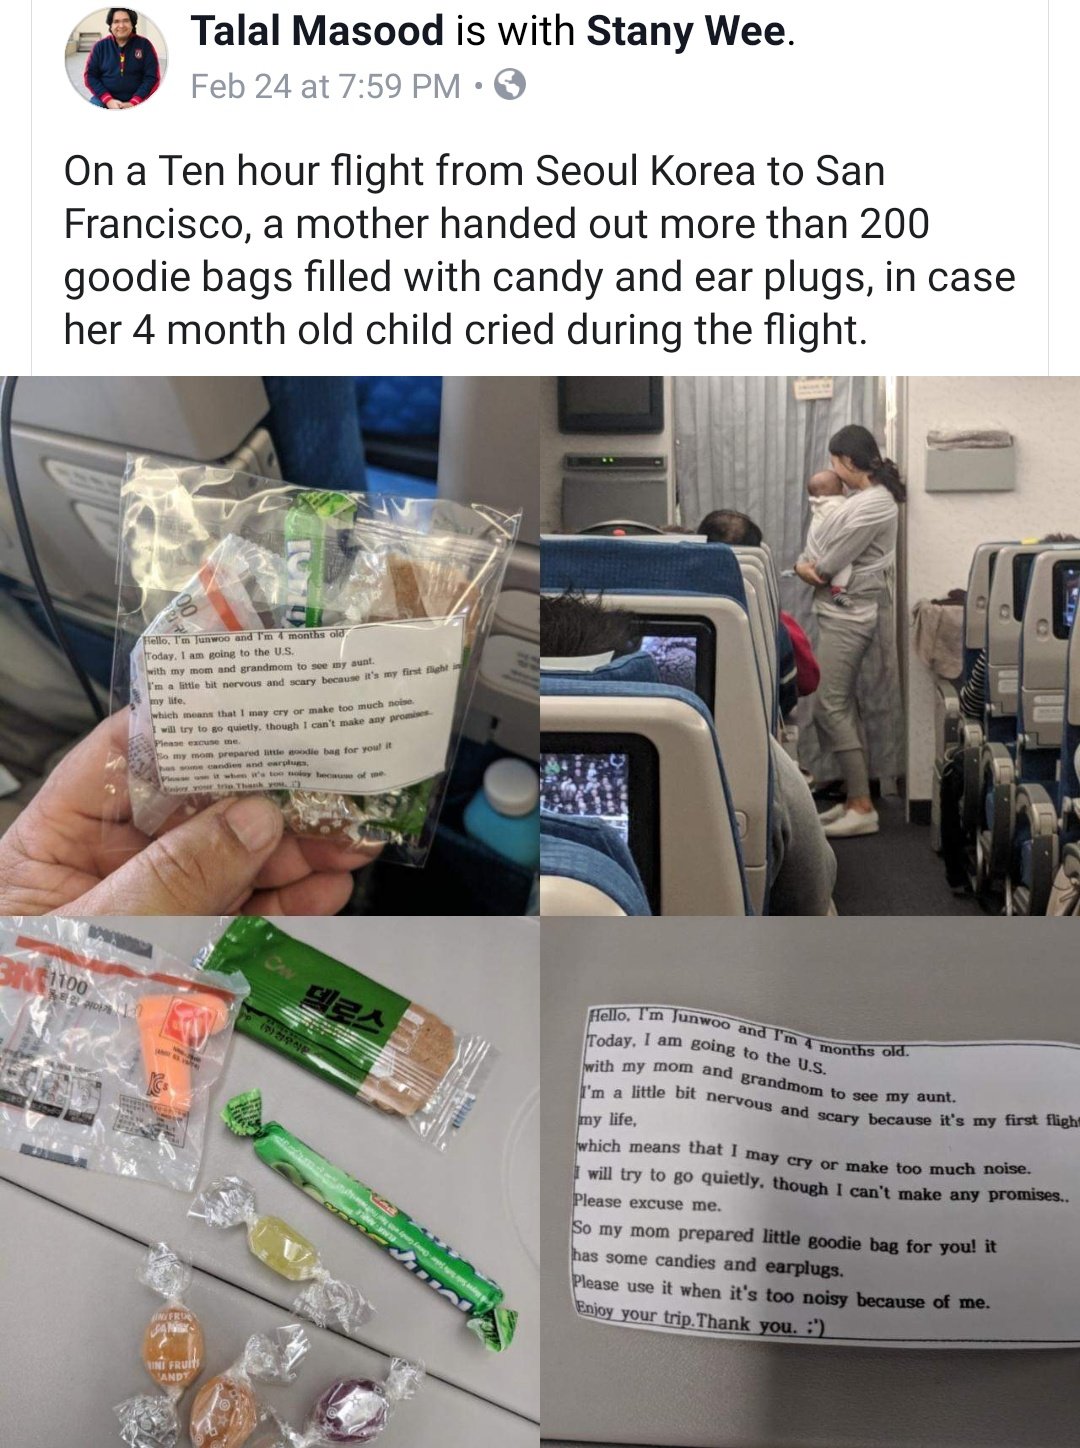 wholesome meme Talal Masood is with Stany Wee. Feb 24 at On a Ten hour flight from Seoul Korea to San Francisco, a mother handed out more than 200 goodie bags filled with candy and ear plugs, in case her 4 month old child cried during the flight. he Hello